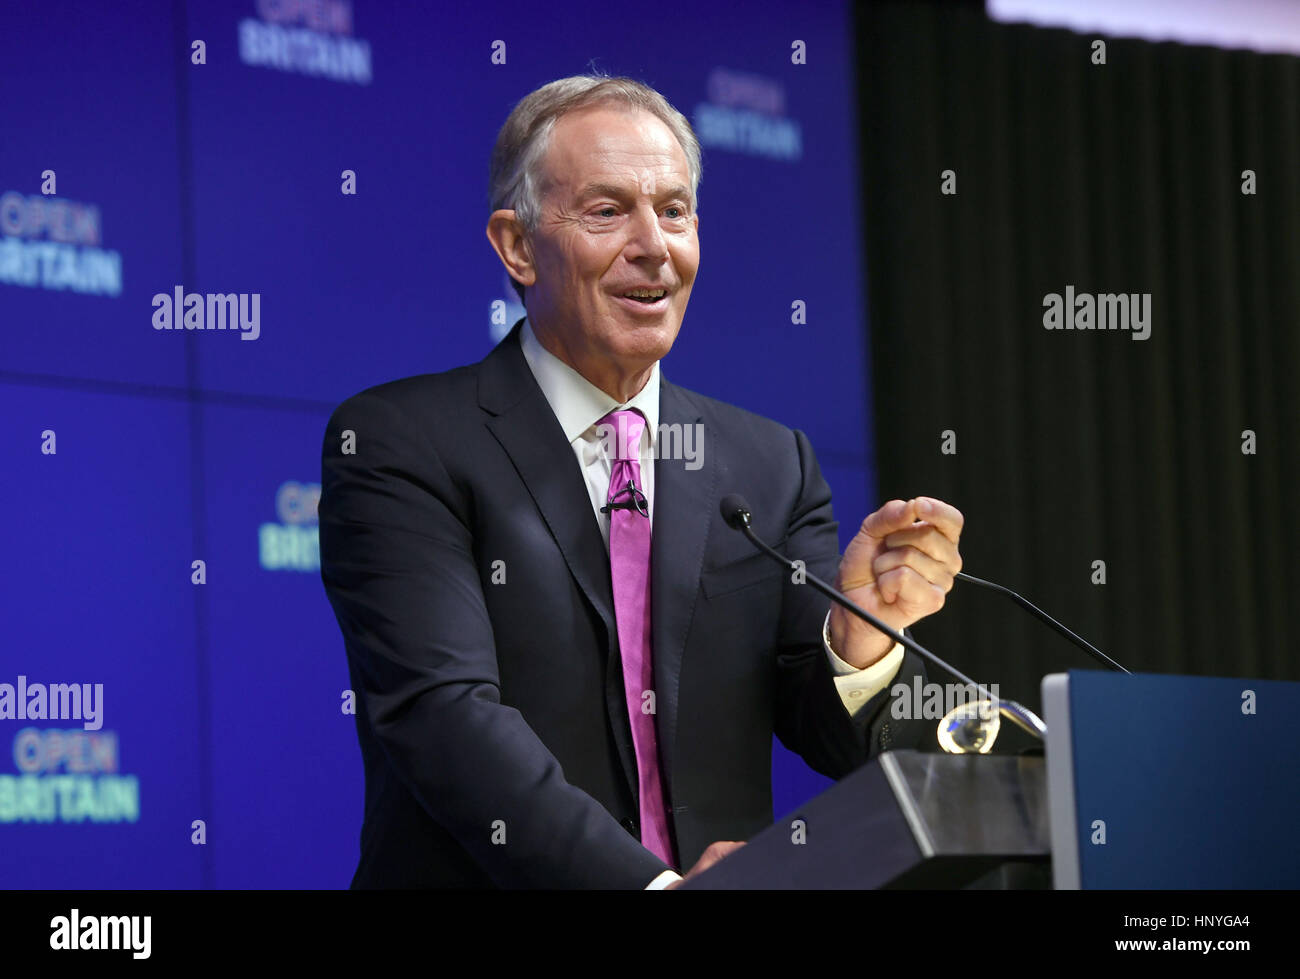 PABEST Former Prime Minister Tony Blair during his speech on Brexit at an Open Britain event in central London. Stock Photo